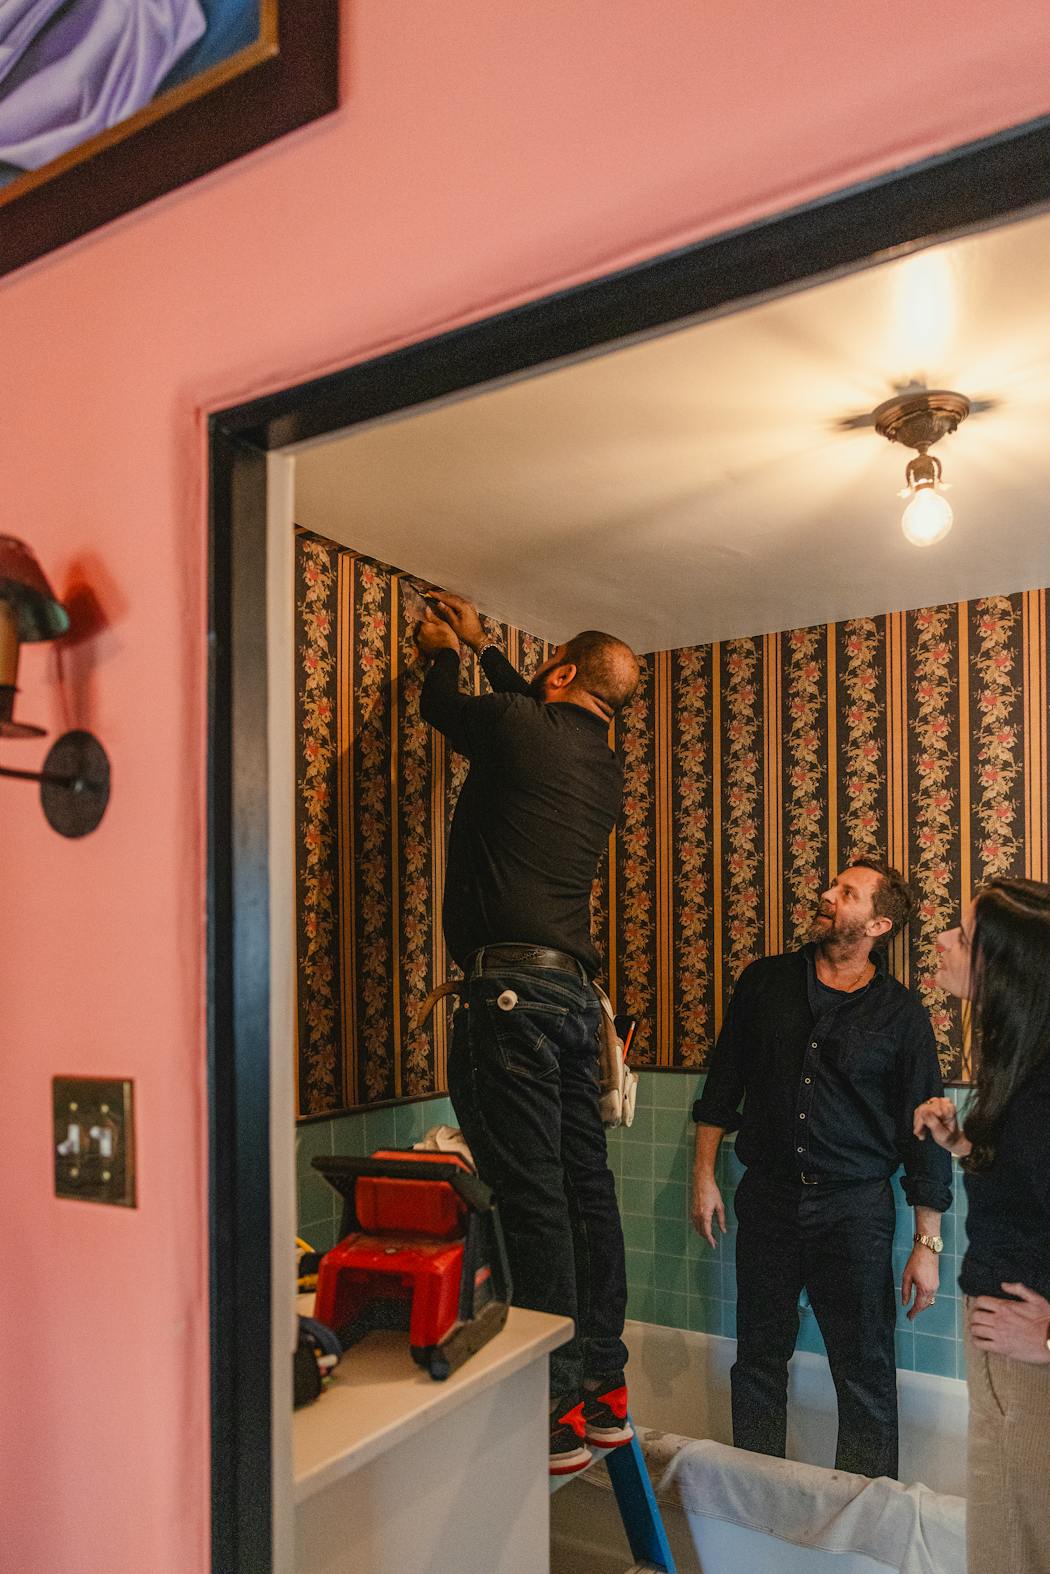 Todd Nickey, center, and Amy Kehoe, right, of the Los Angeles-based design firm Nickey Kehoe, watch as a worker installs wallpaper in a bathroom at Nickey’s home in Pasadena, Calif. 